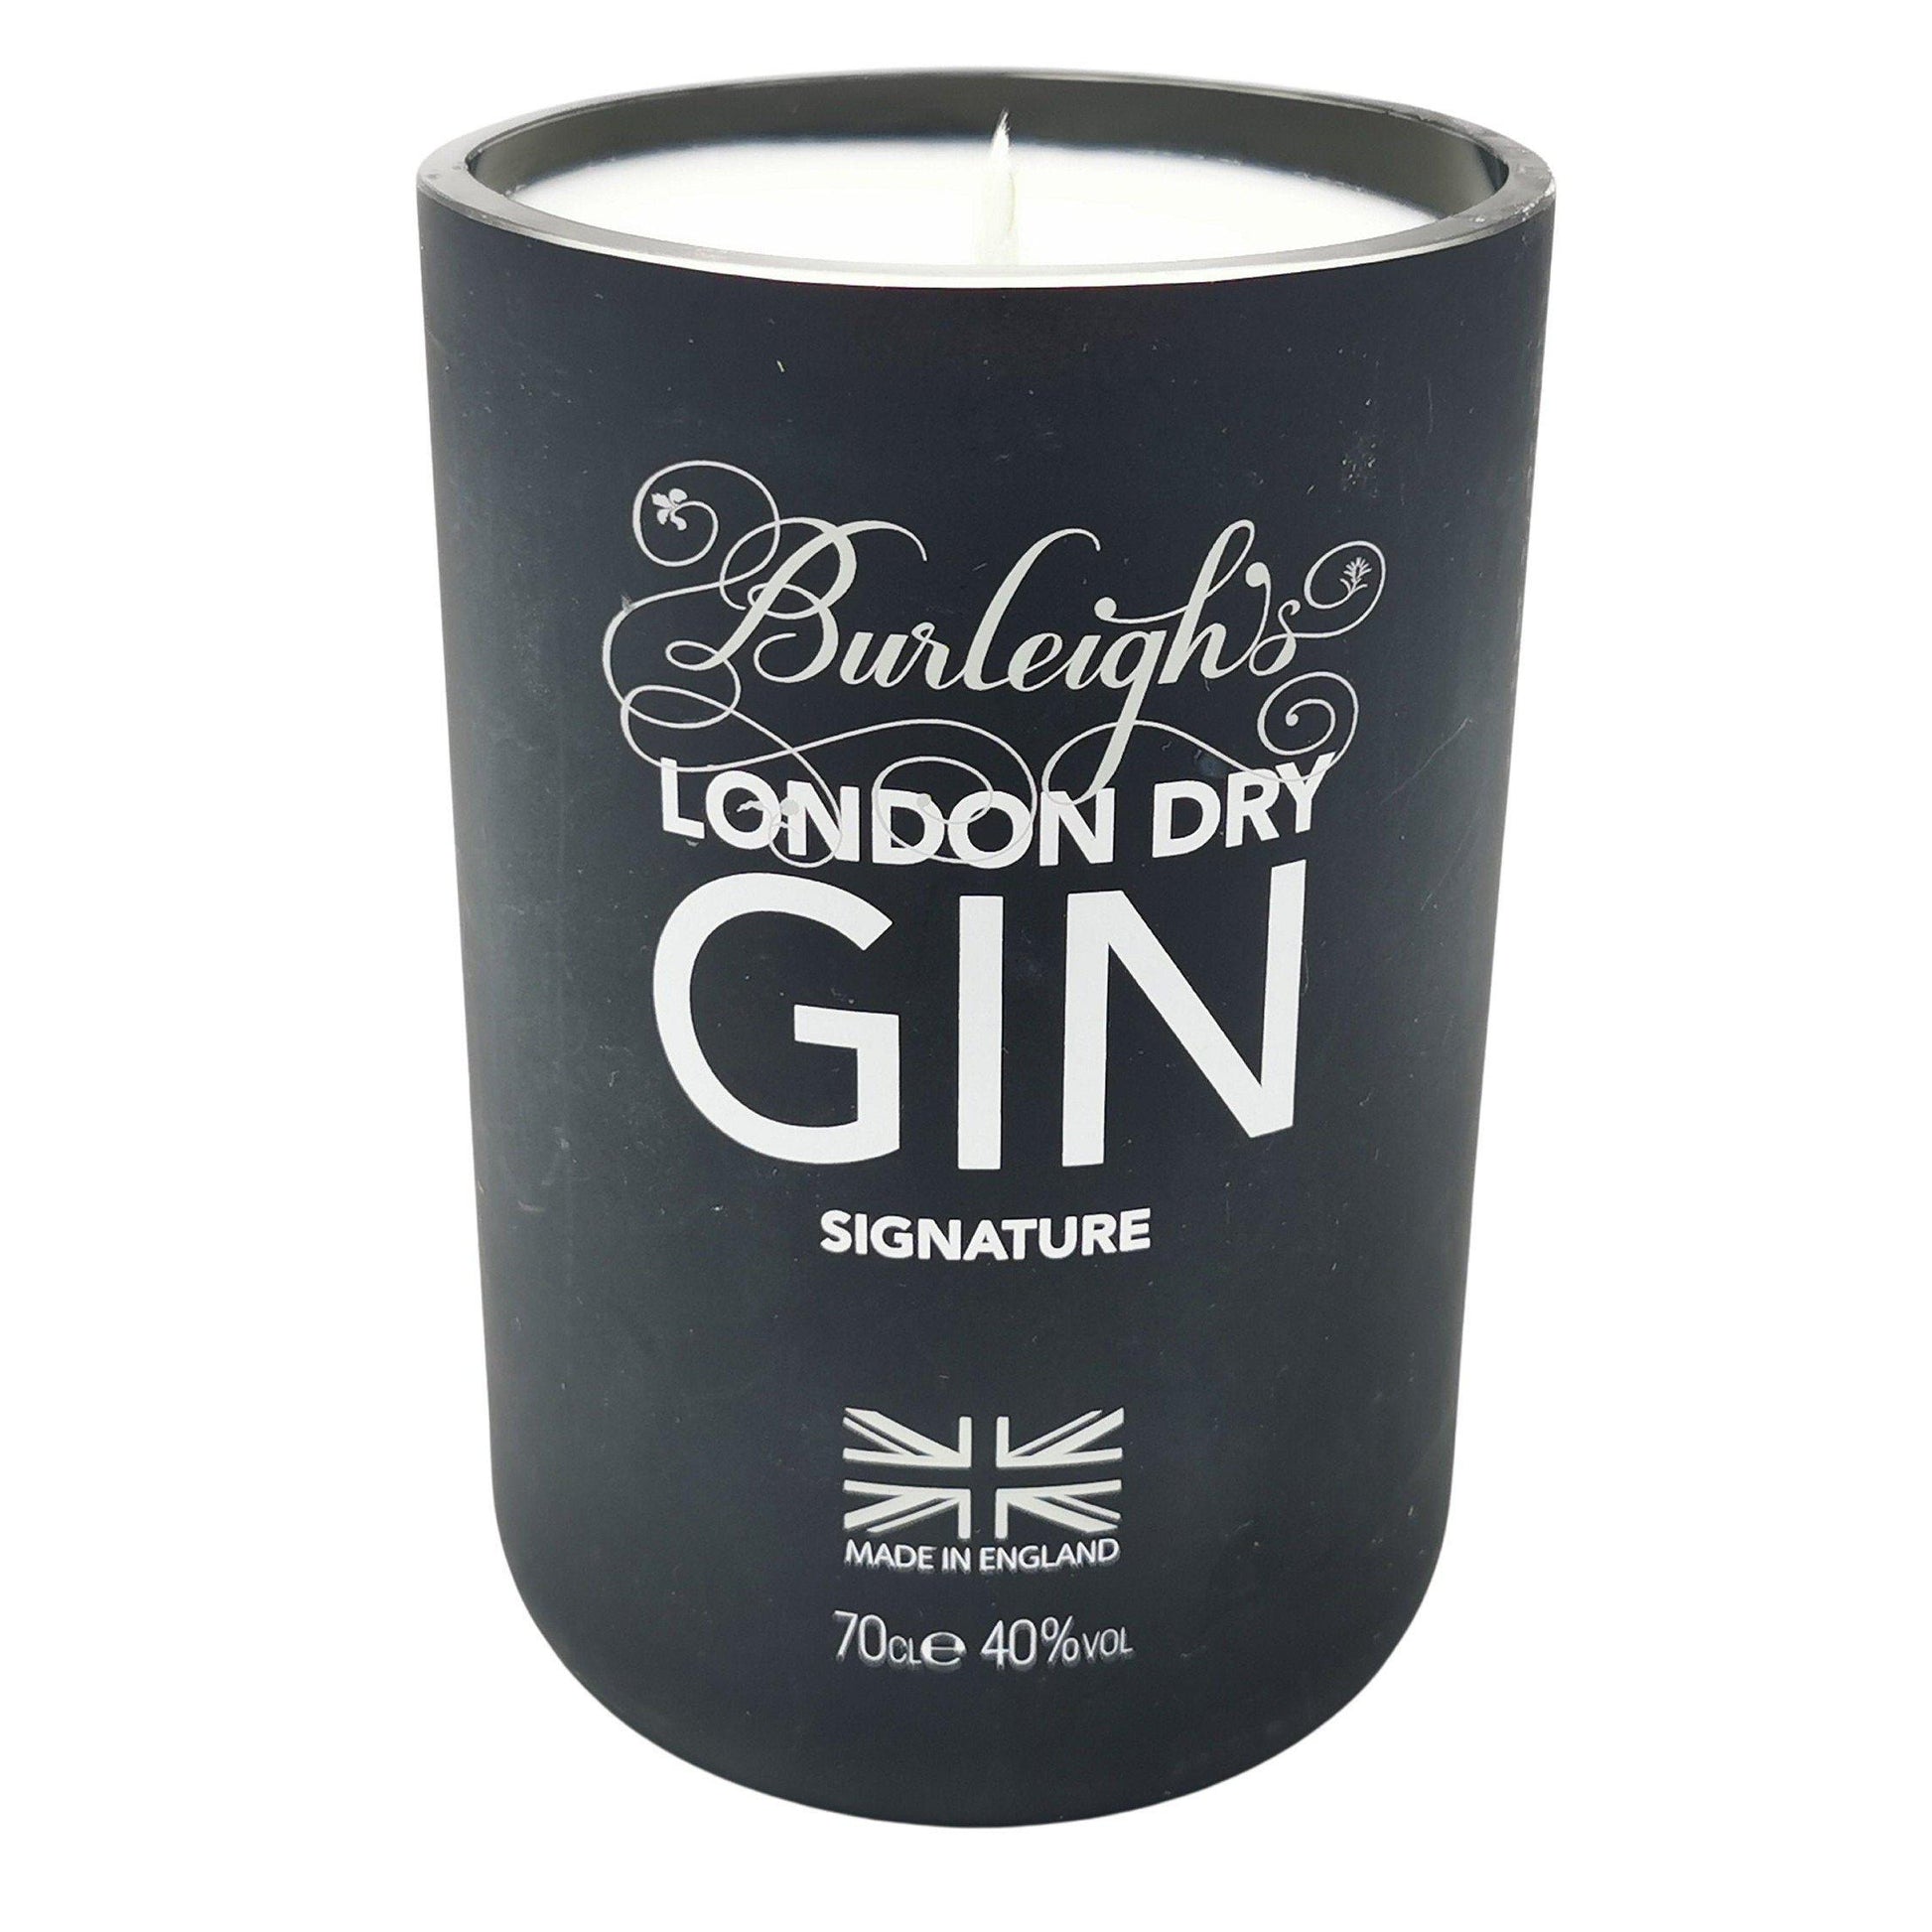 Burleighs Gin Bottle Candle Gin Bottle Candles Adhock Homeware